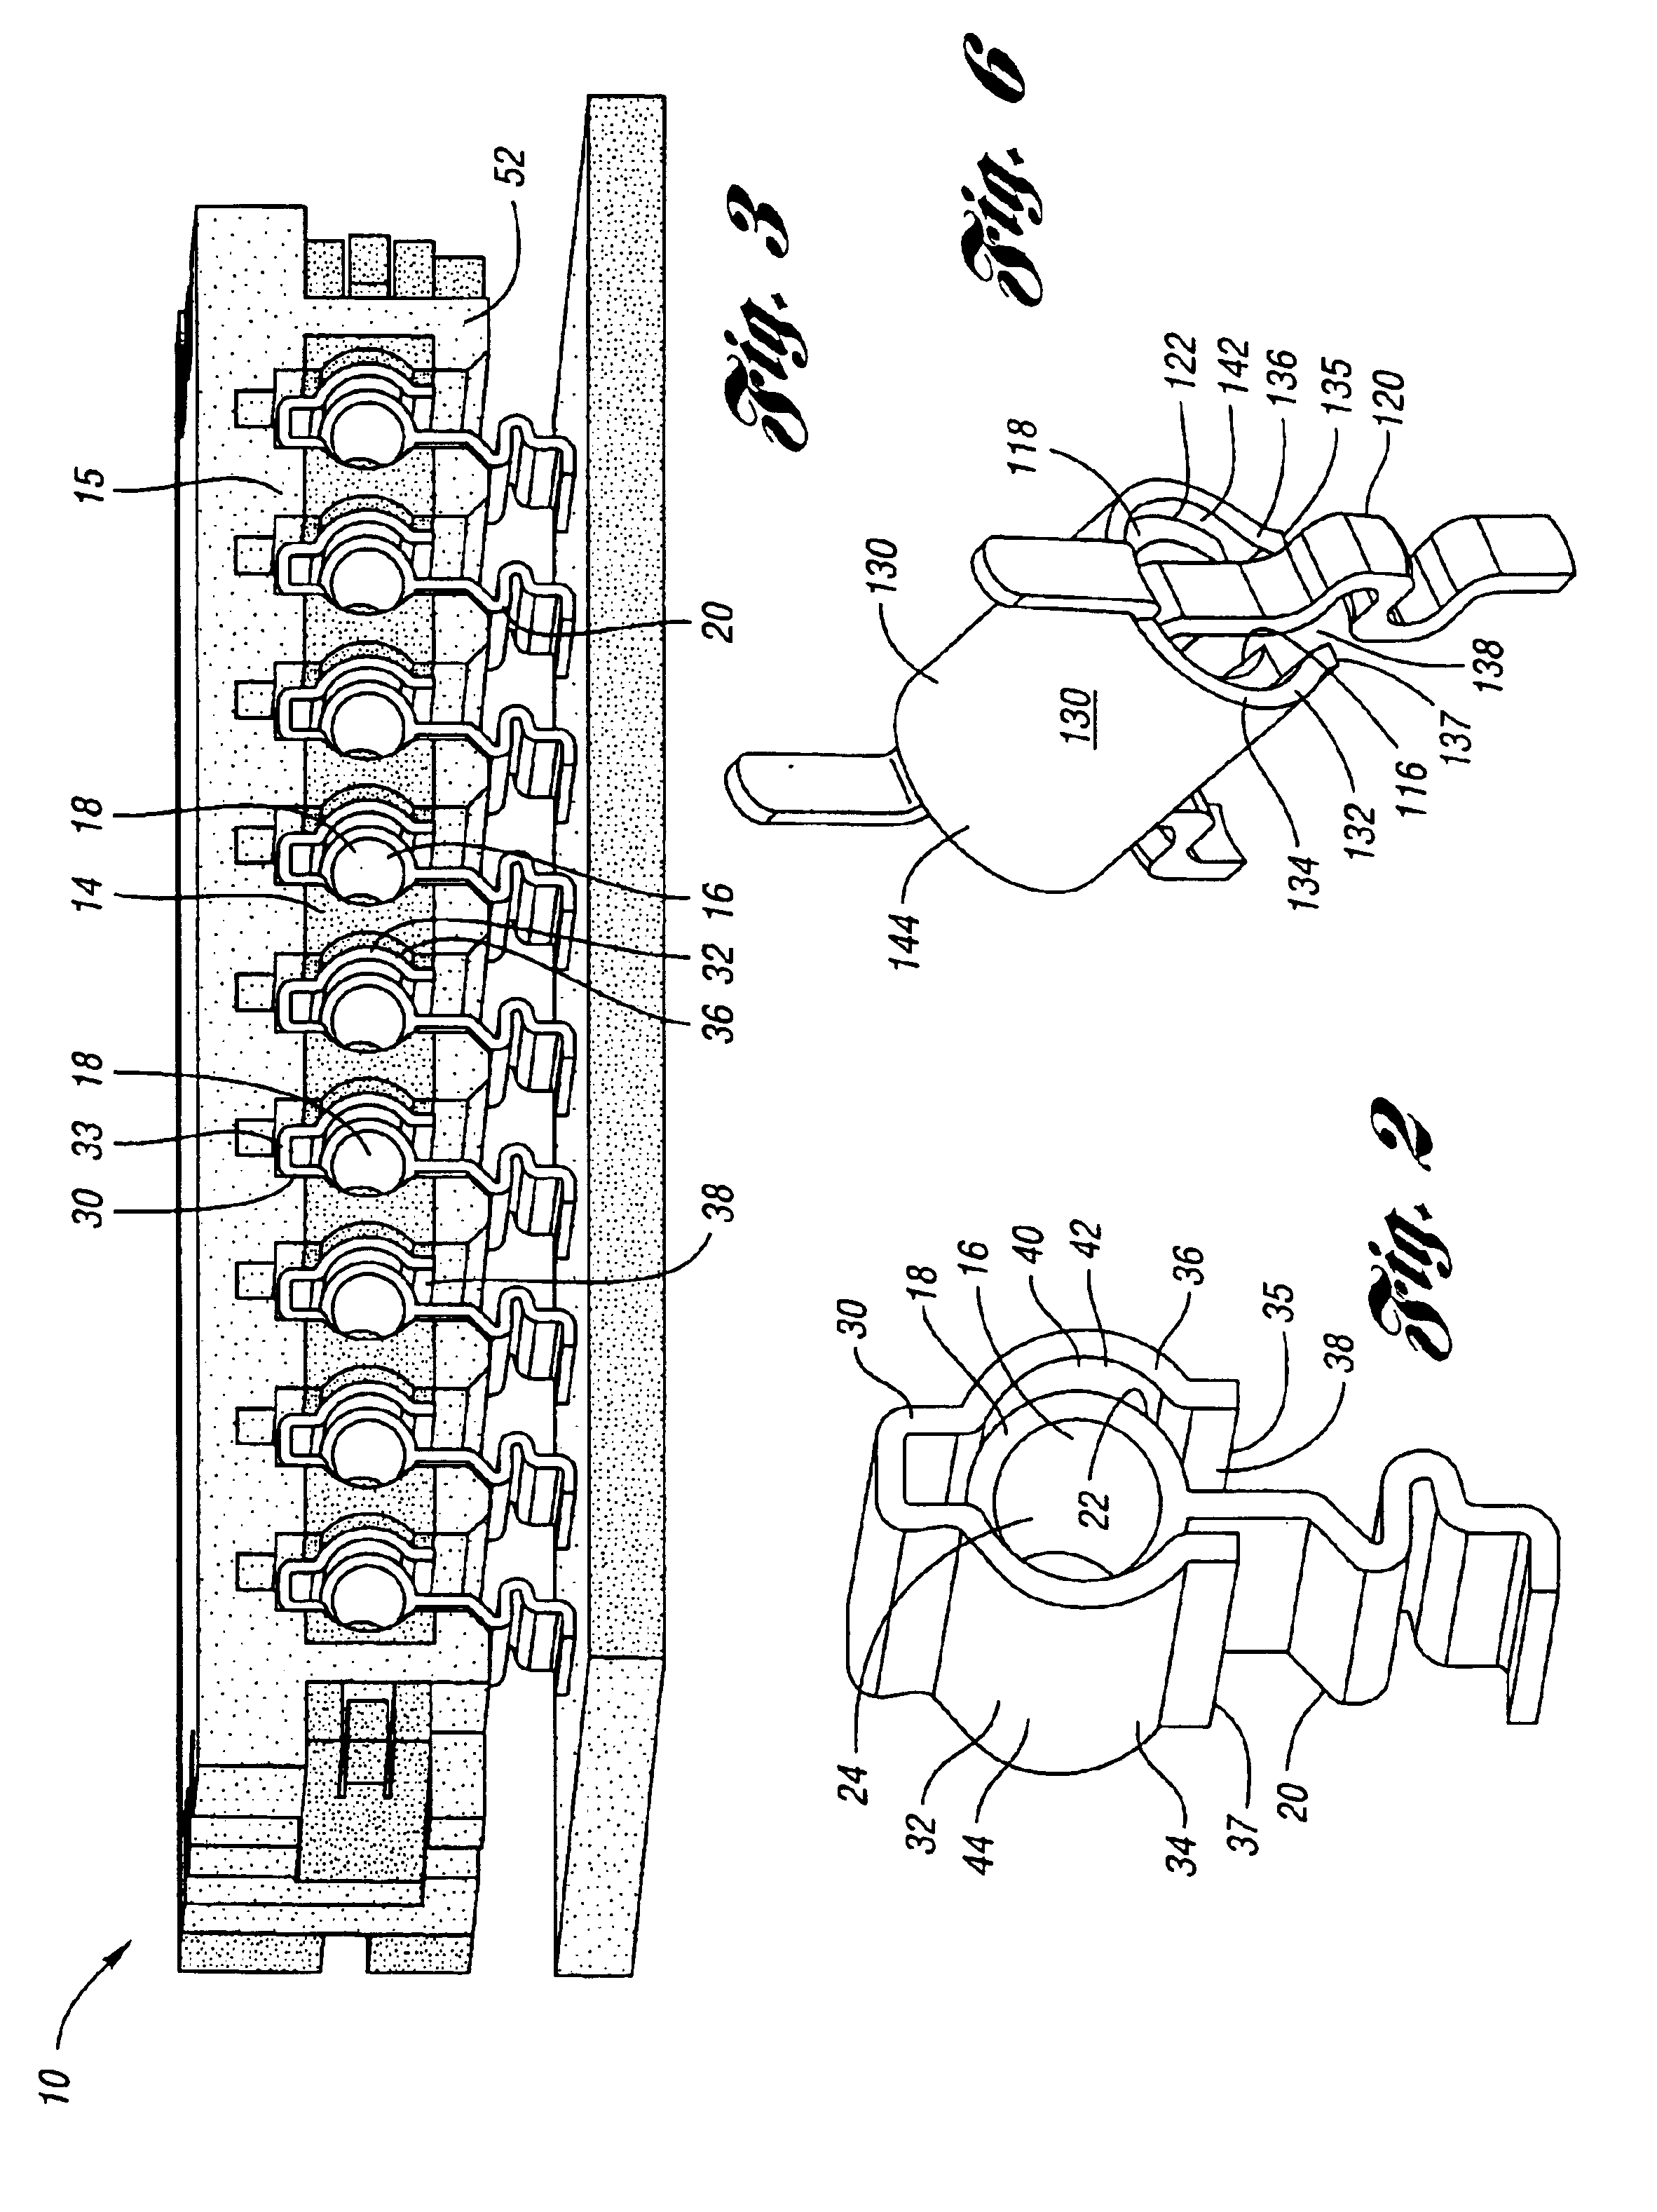 Connector assembly for electrical interconnection